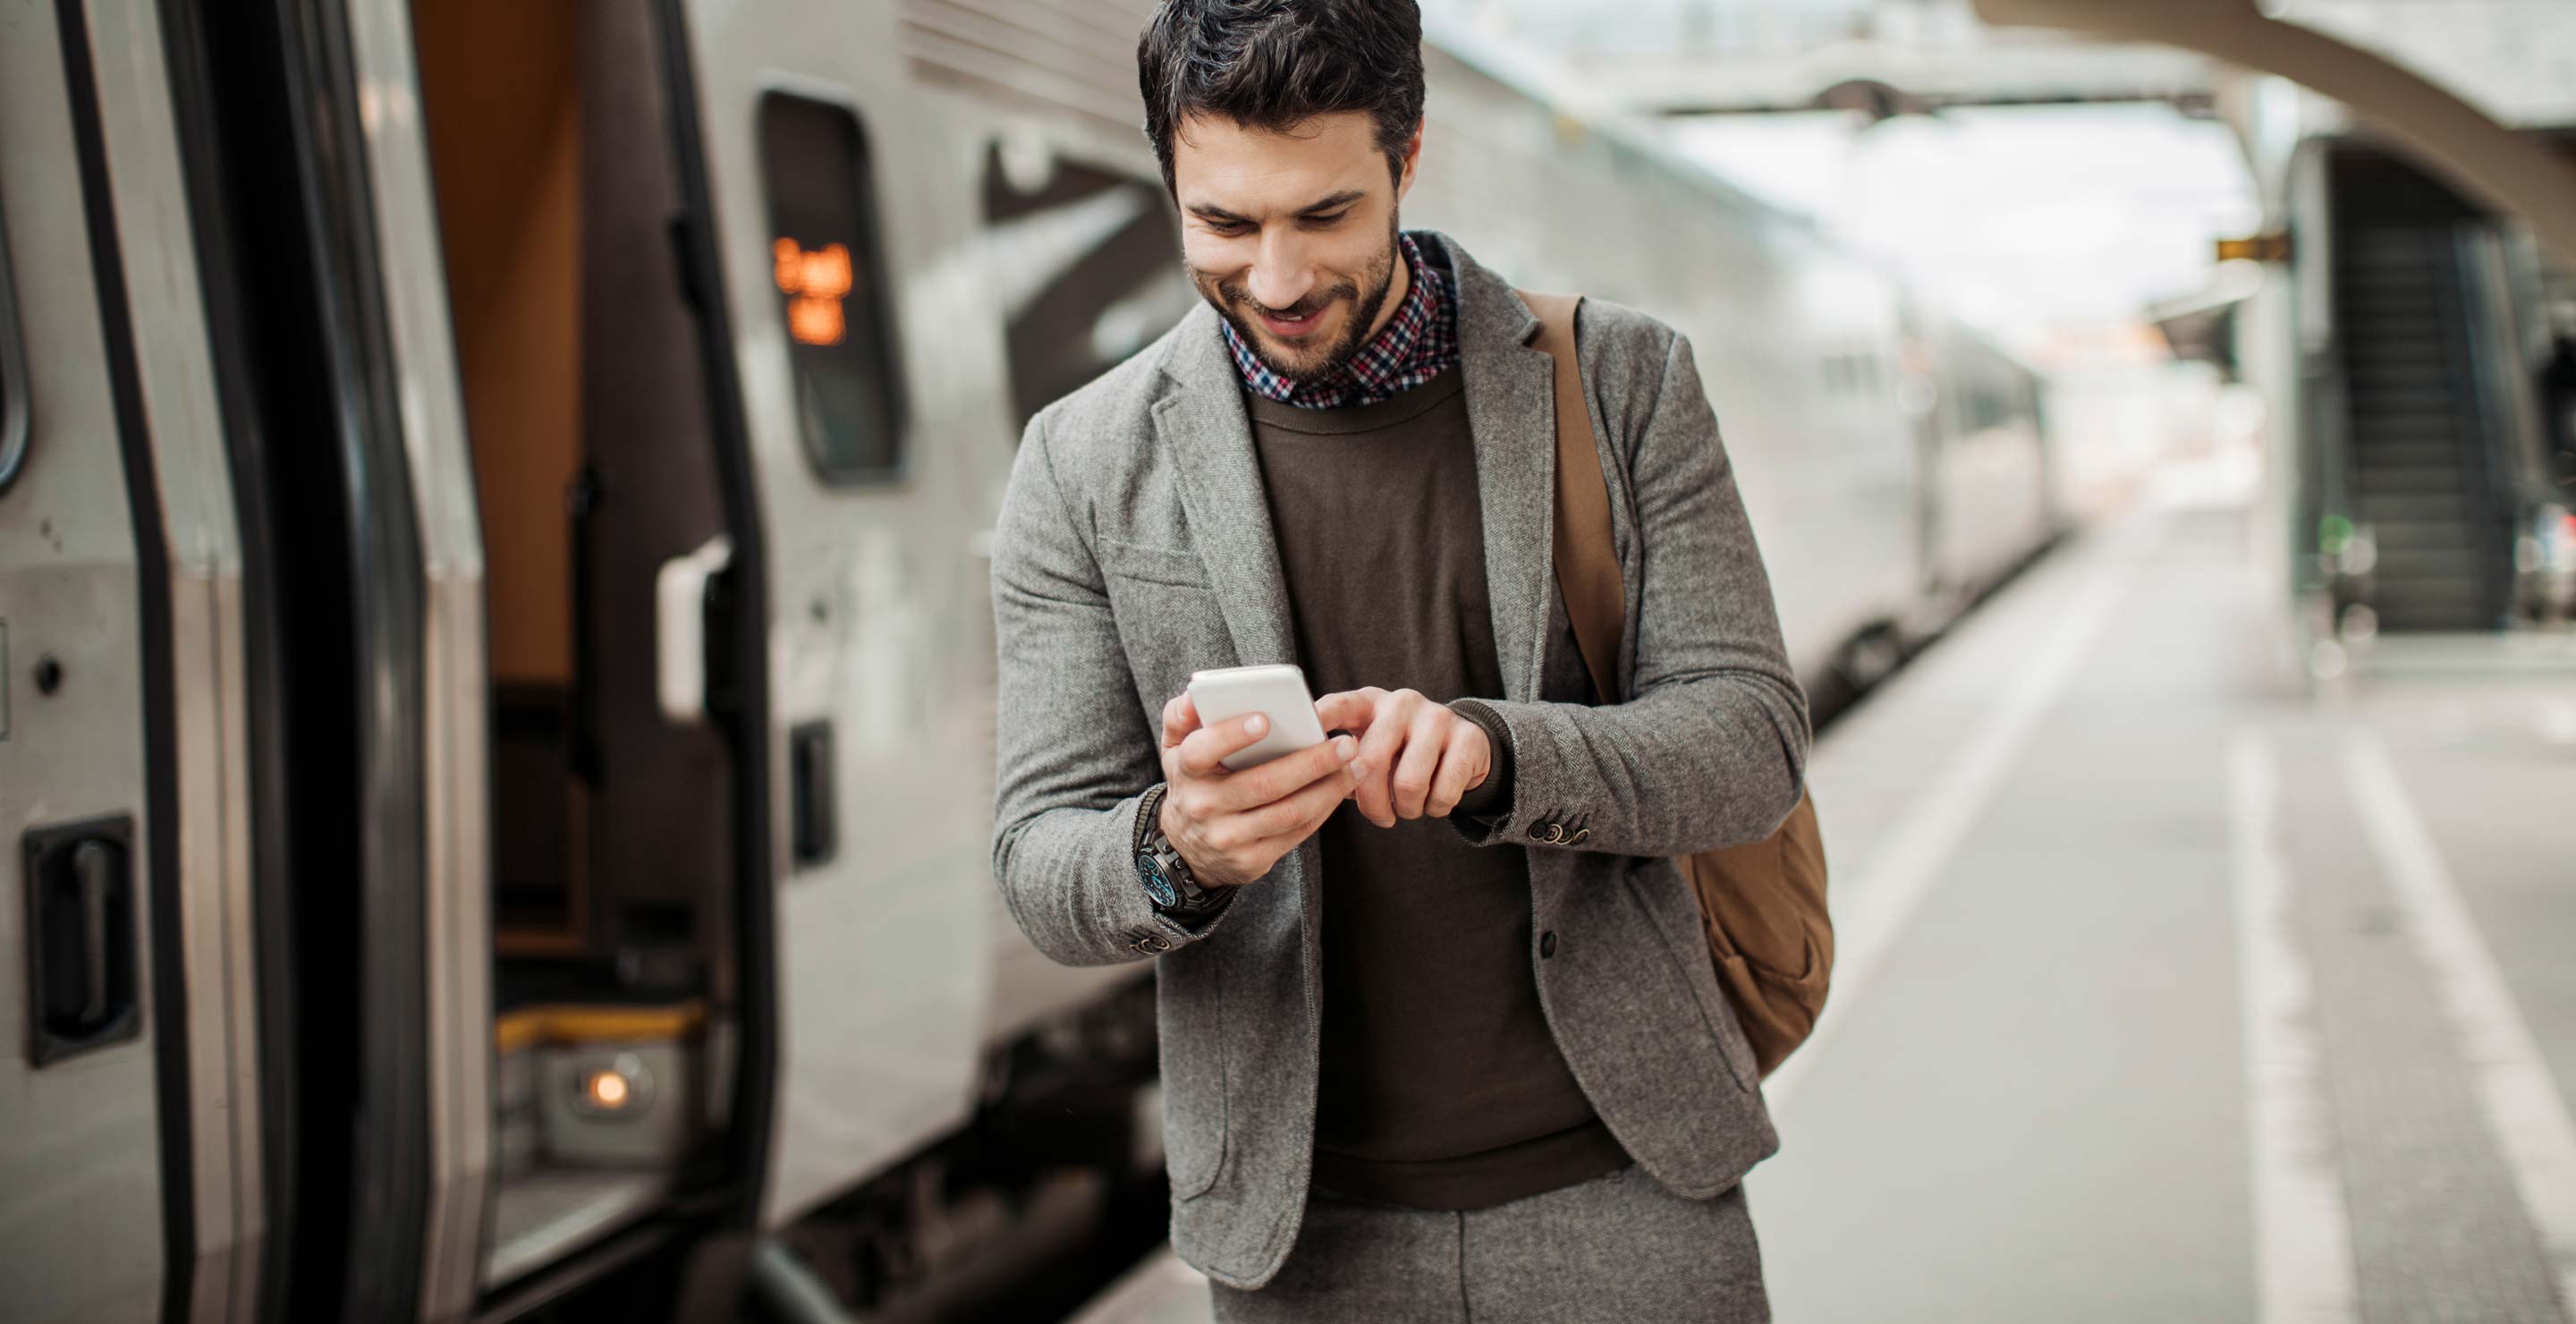 Check train times, book tickets, save time & money - Trainline App